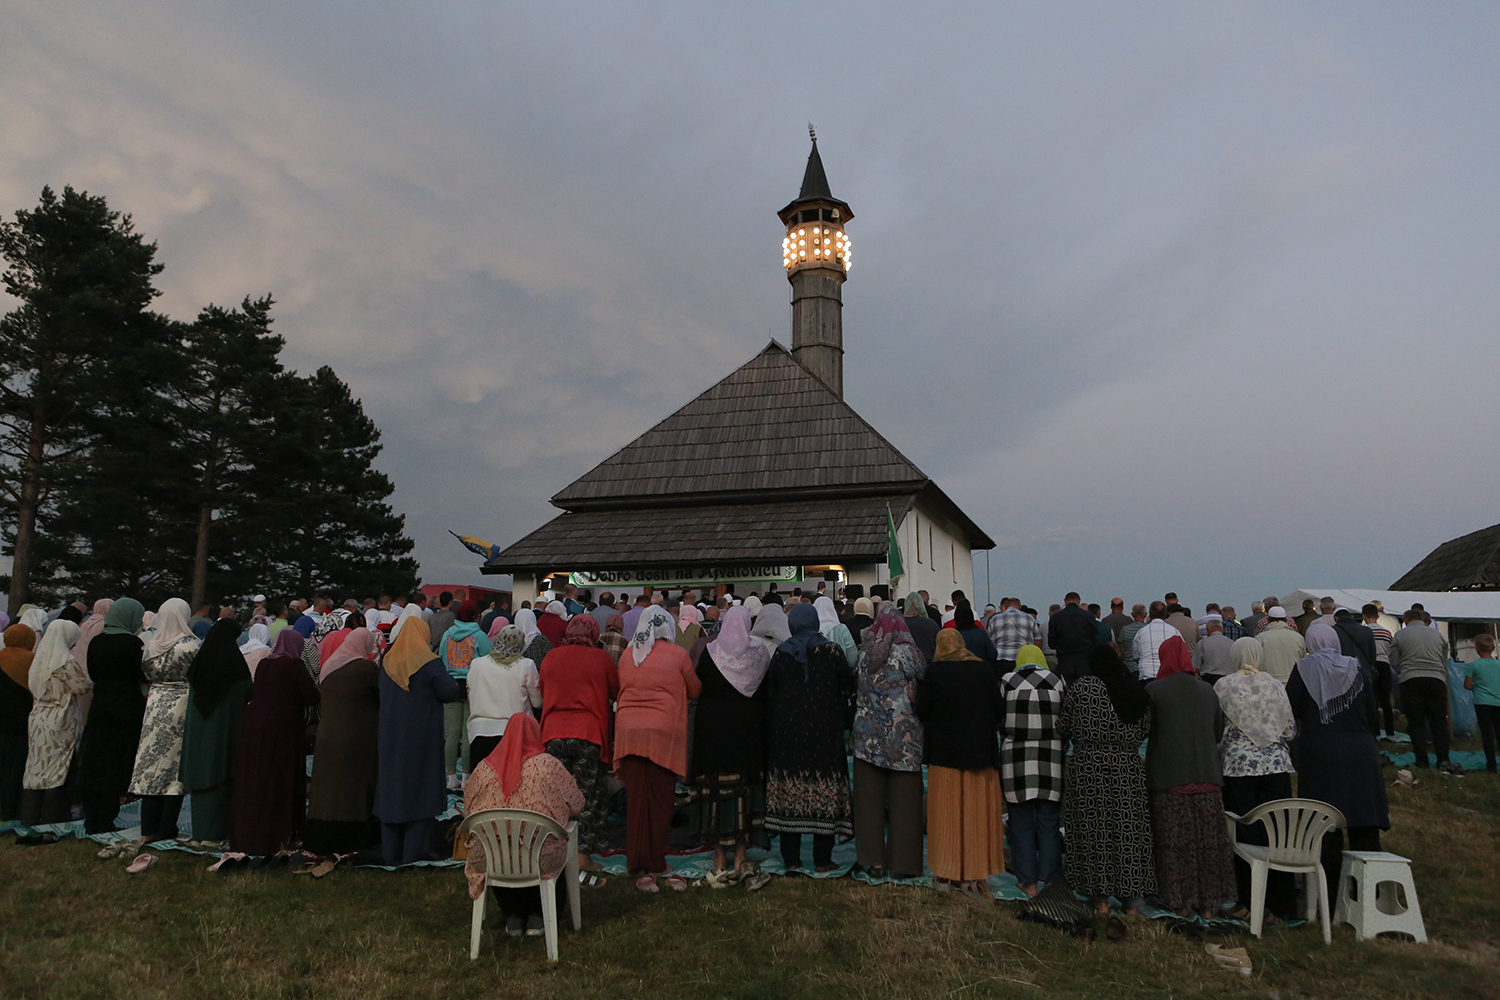 Muslim worshippers pray in the open at sundown in front of a mosque (photo: Konstantin Novakovic)